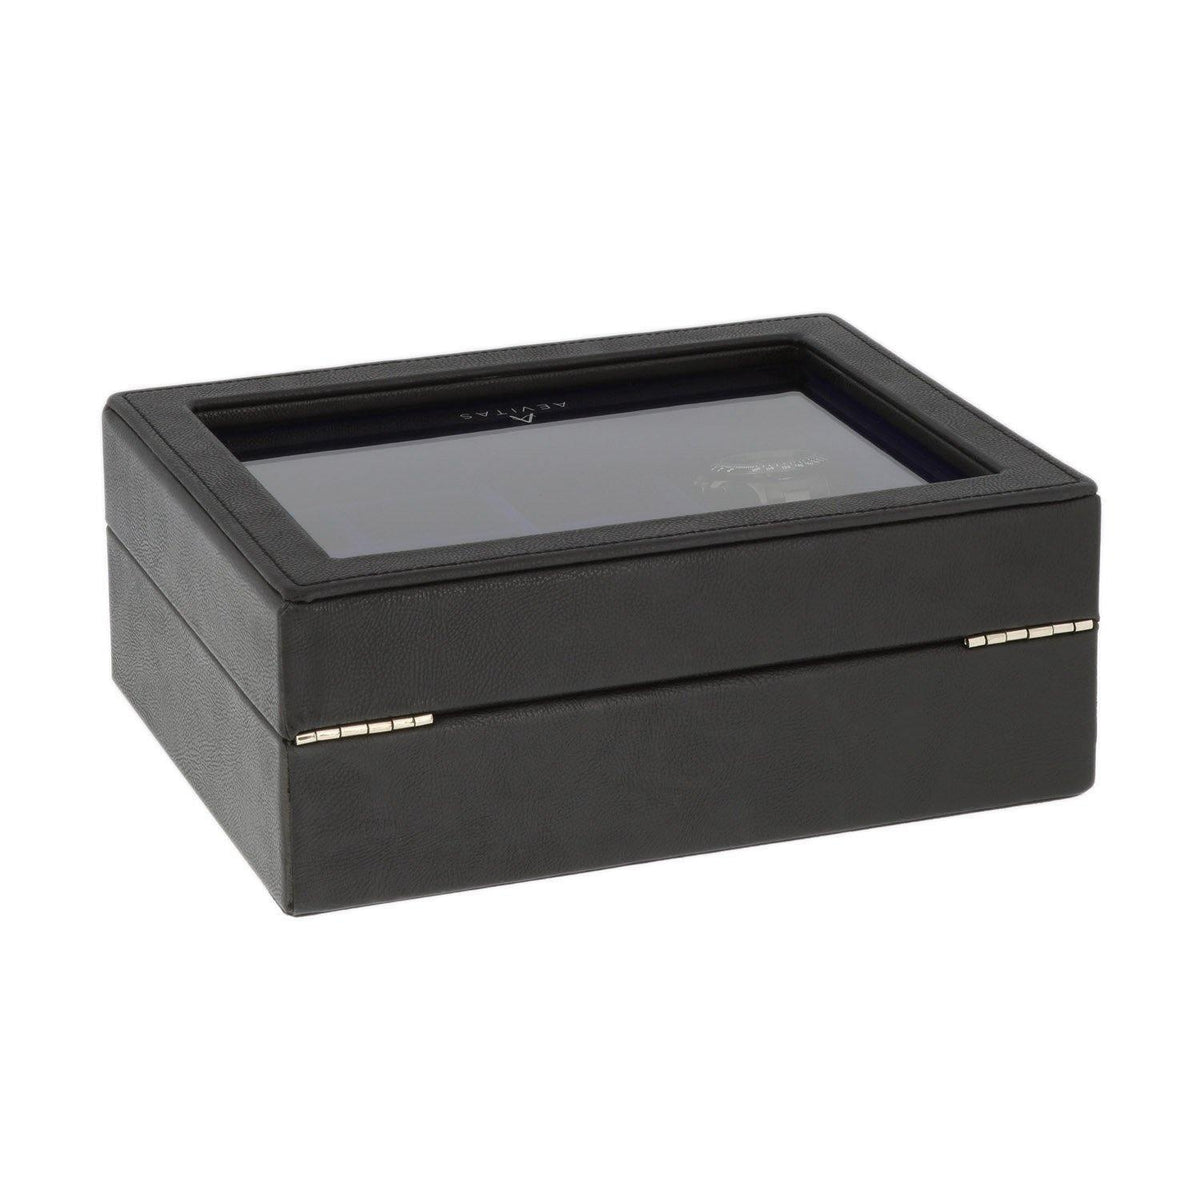 16 Pair Cufflinks and 4 Piece Watch Box in Black Genuine Leather by Aevitas